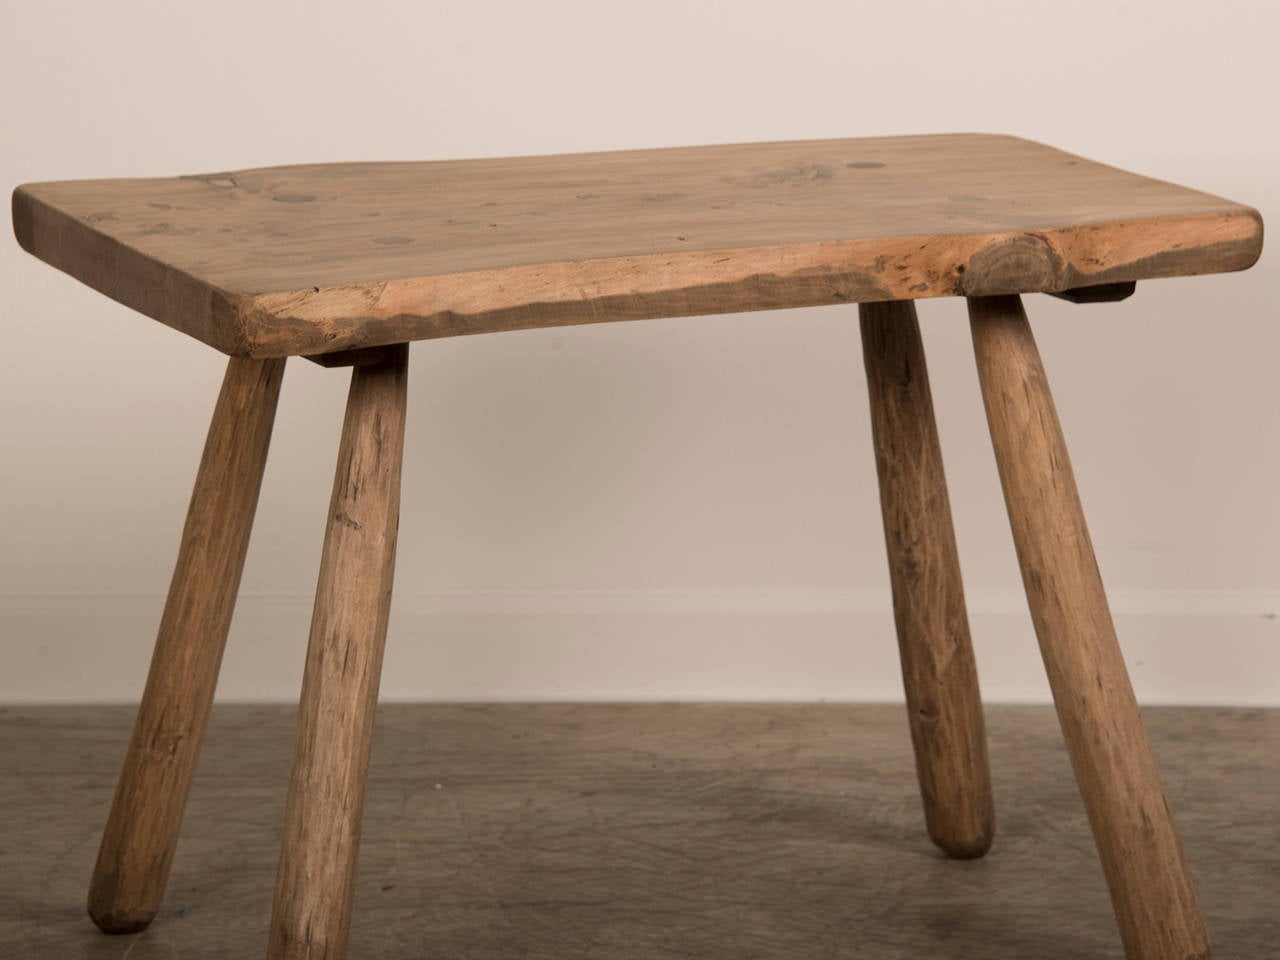 Hand Hewn Elm Side Table, France c.1820. The marvelous rustic quality of this table embodies a sculptural aesthetic while retaining an eminently functional capacity. Each of the individually shaped legs are set at an angle to the top to ensure